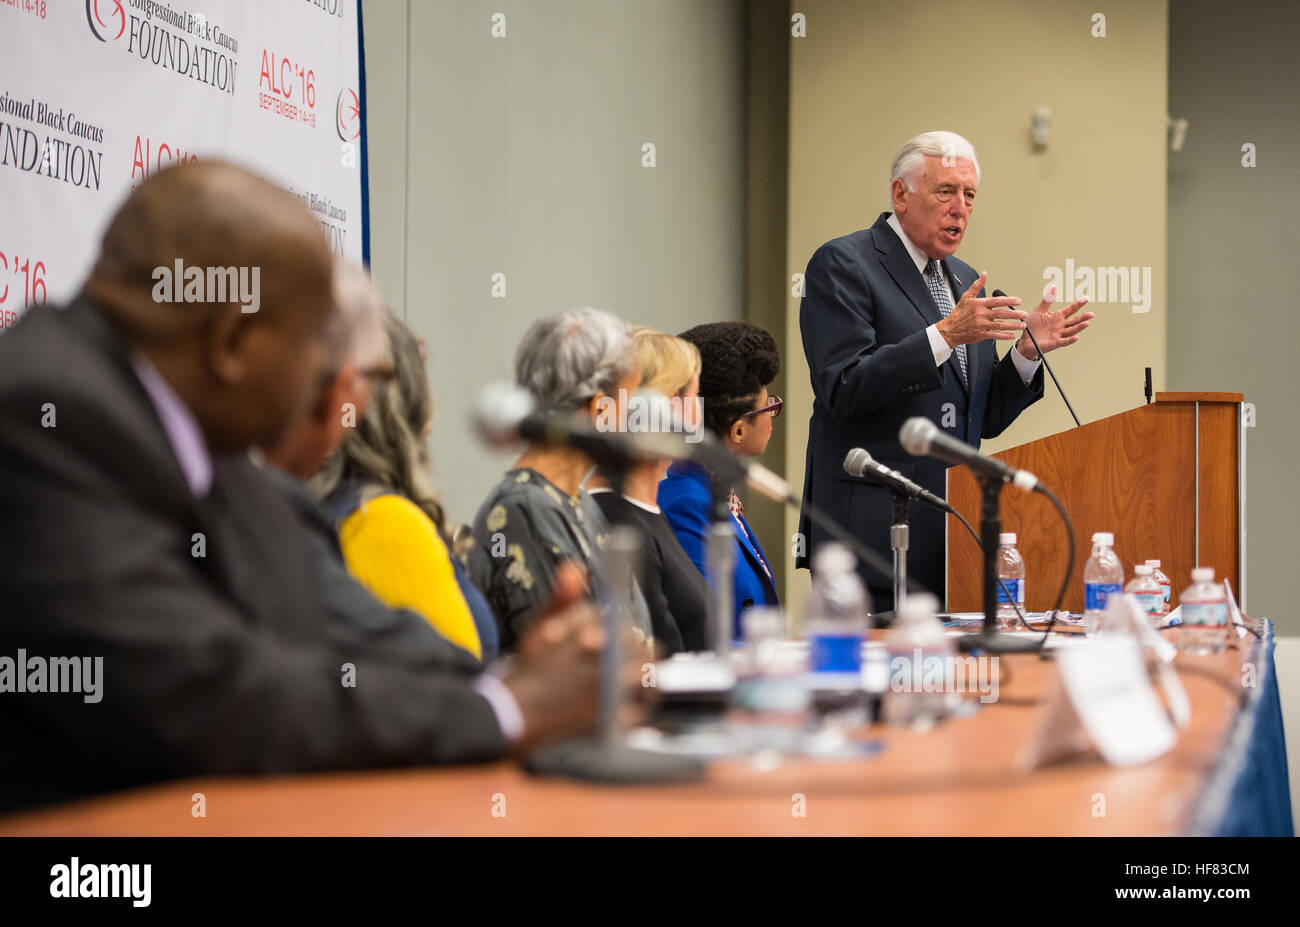 Representative Steny Hoyer (D- Md.) speaks during a panel on &quot;Women in STEM: A Gender Gap to Innovation&quot; at the Annual Legislative Congress (ALC), held by the Congressional Black Caucus, Thursday, September 15, 2016 at the Washington Convention Center in Washington. NASA Administrator Charles Bolden participated in the discussion, which highlighted &quot;Hidden Figures,&quot; a movie about NASA mathematician Katherine Johnson. Aubrey Gemignani) Stock Photo